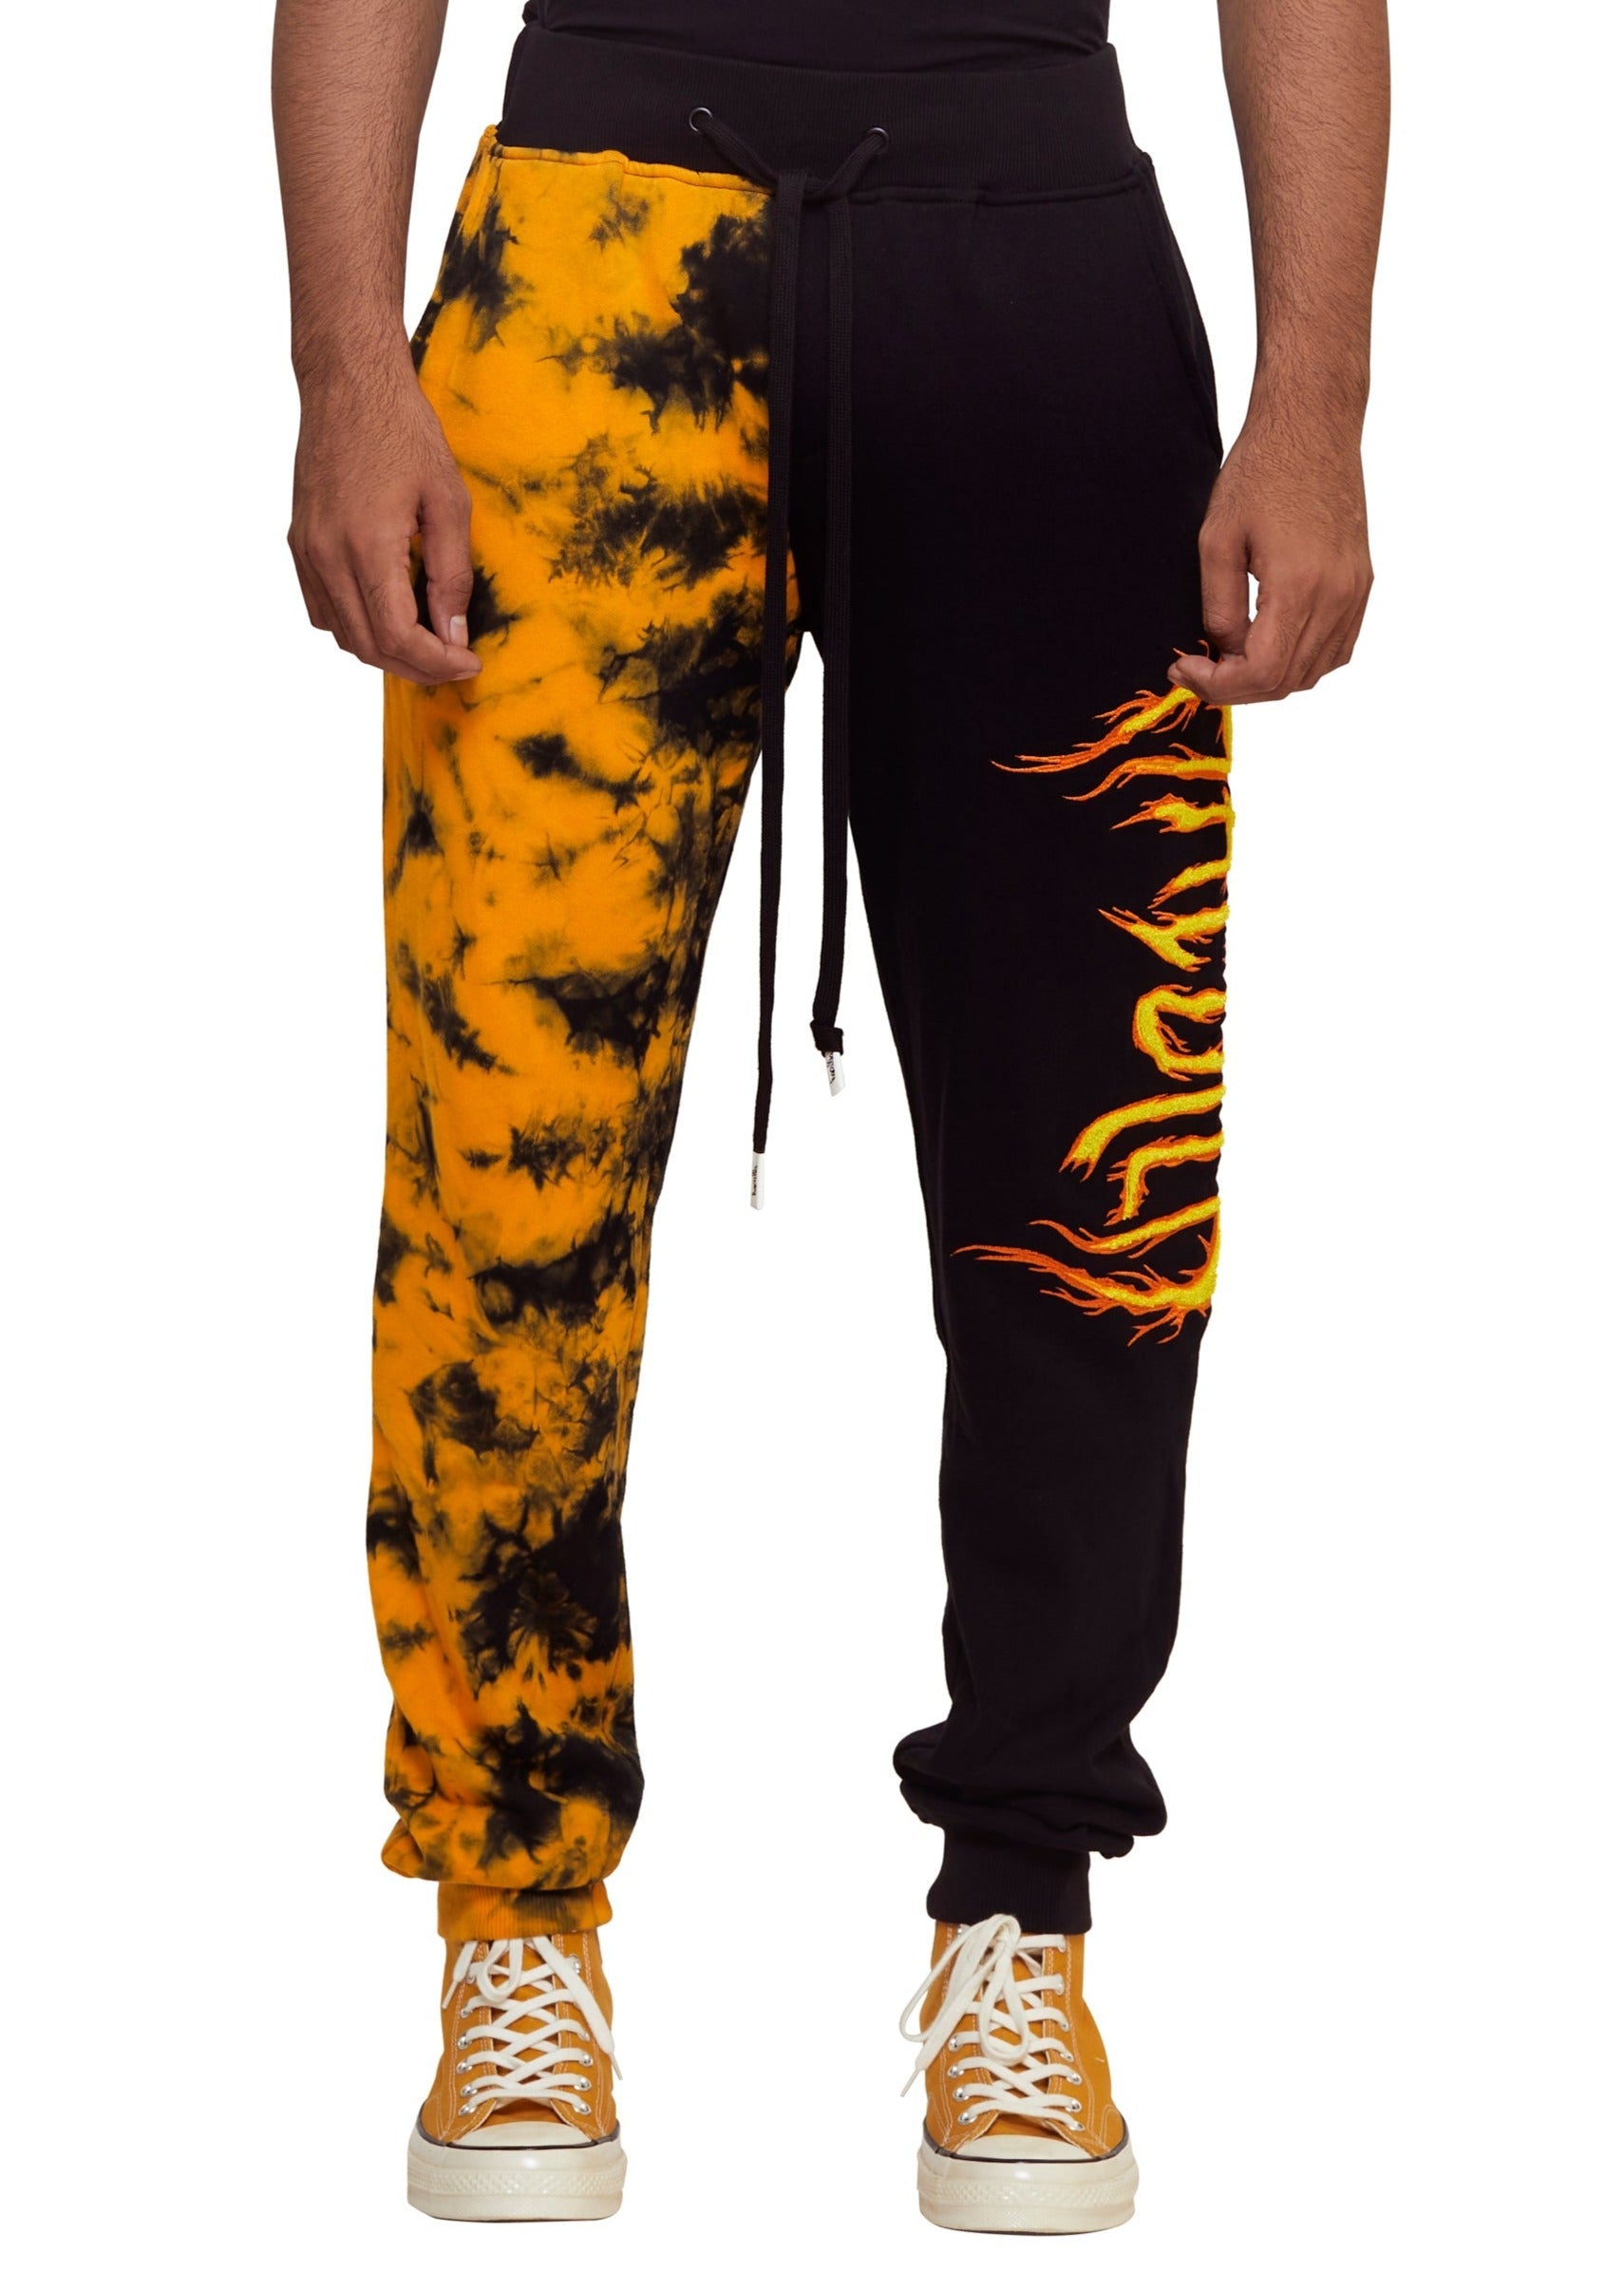 Yellow and black Tie dyed "Flames" graphic knit jogger from the brand Haculla